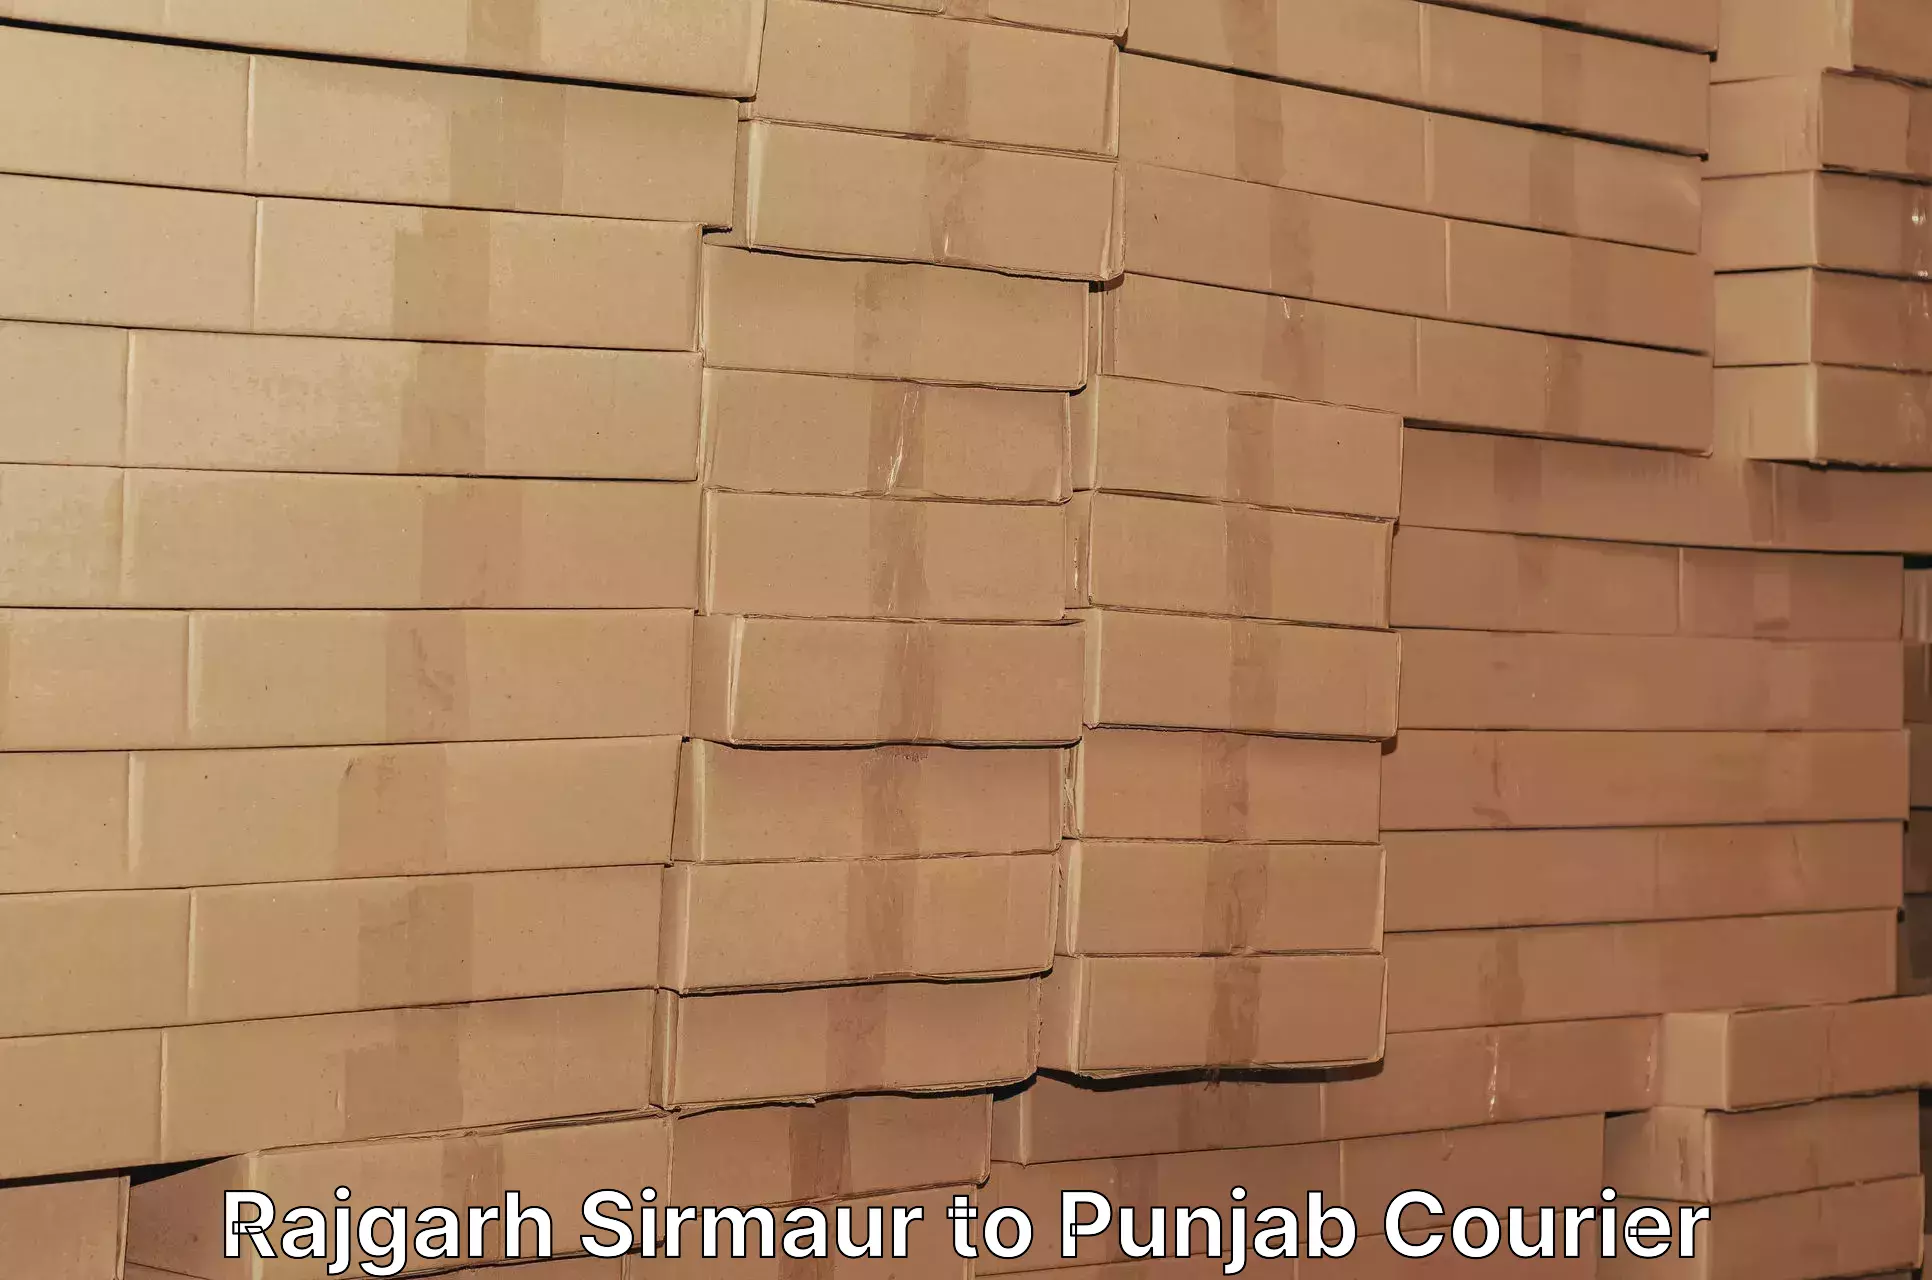 Subscription-based courier Rajgarh Sirmaur to Firozpur